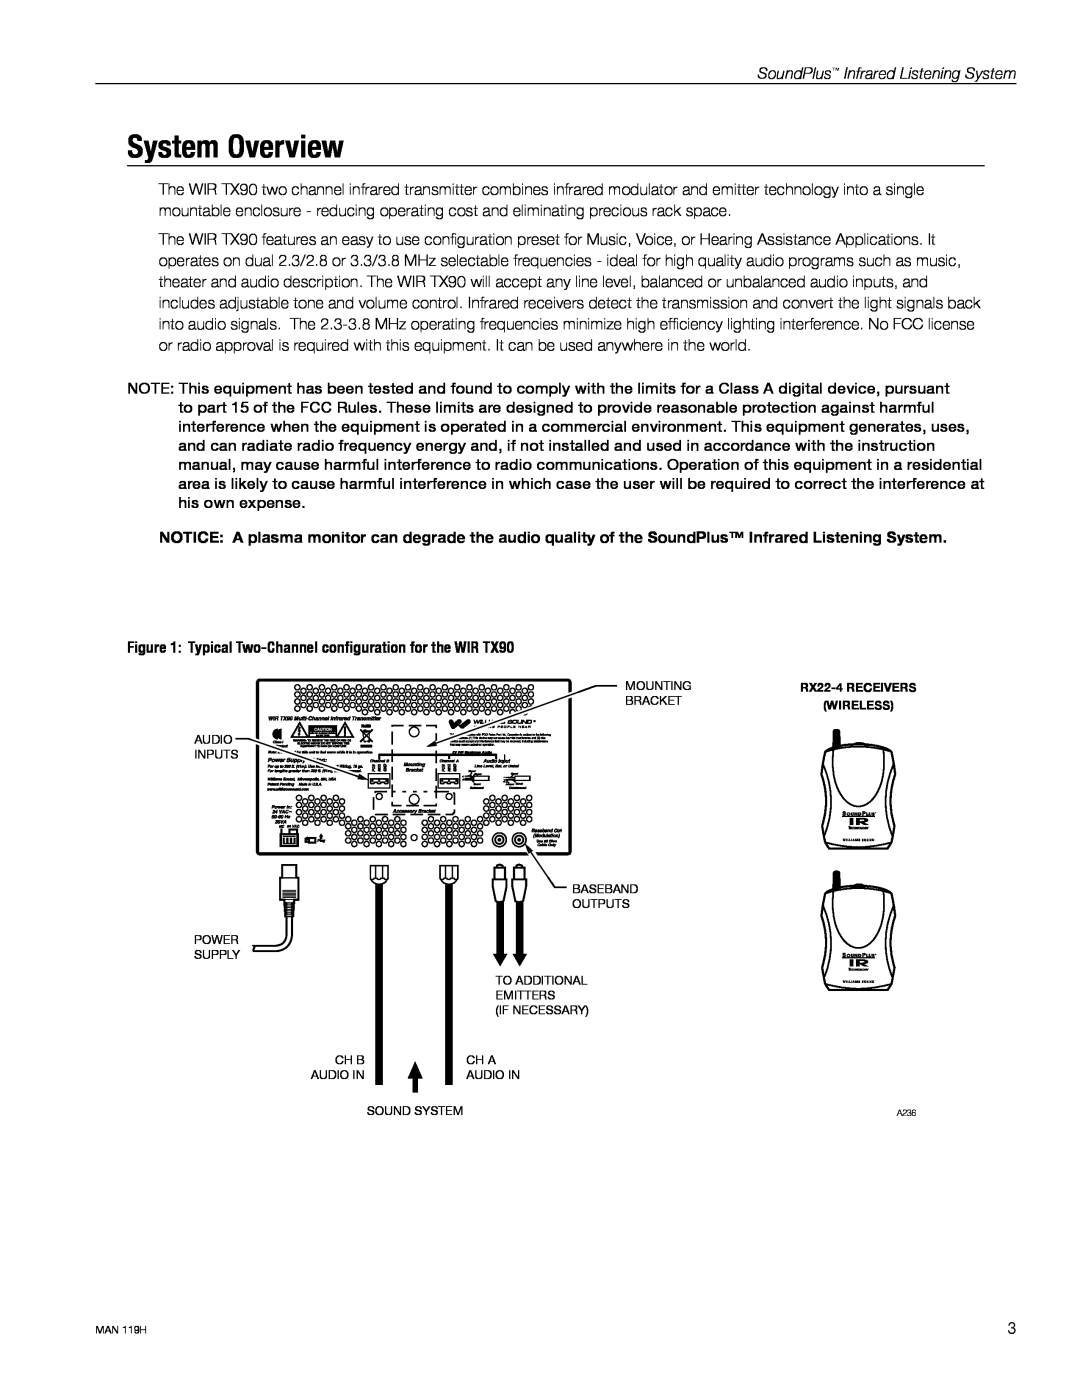 Williams Sound WIRRX18, WIRSYS 90 ADV, Model WIRTX90 System Overview, Typical Two-Channel configuration for the WIR TX90 